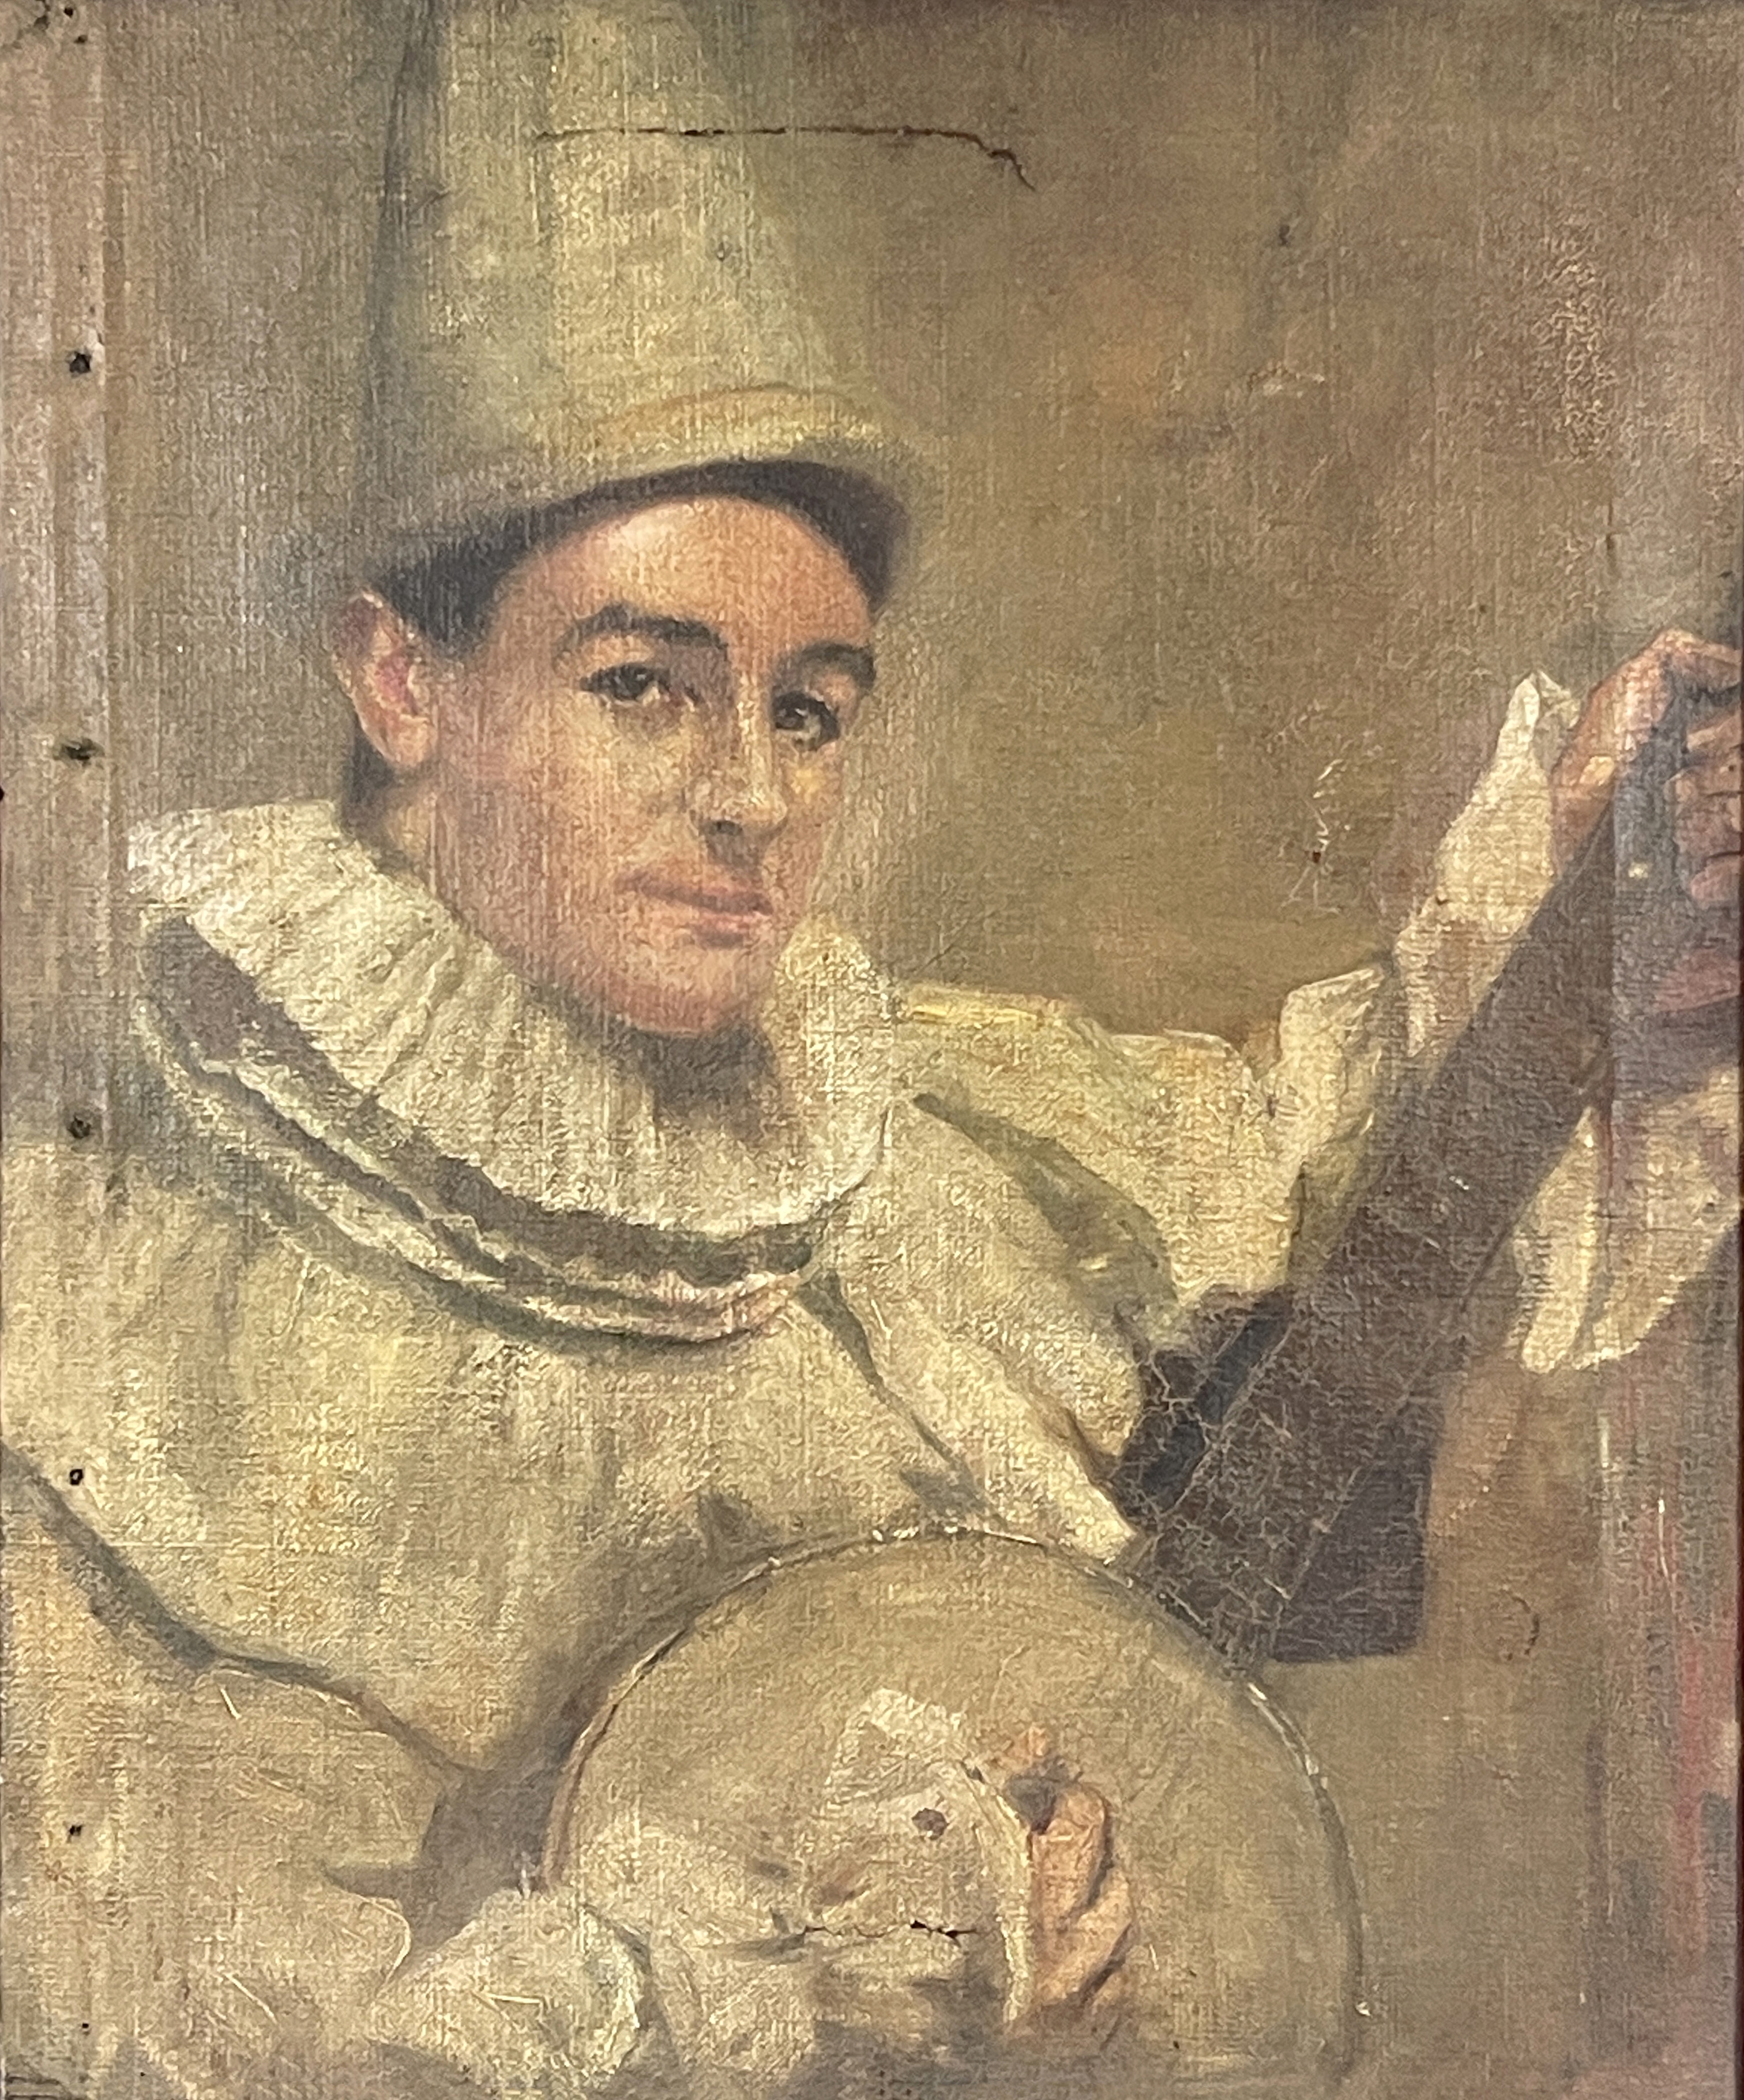 Portrait of a Pierrot playing a banjo by Dame Laura Knight